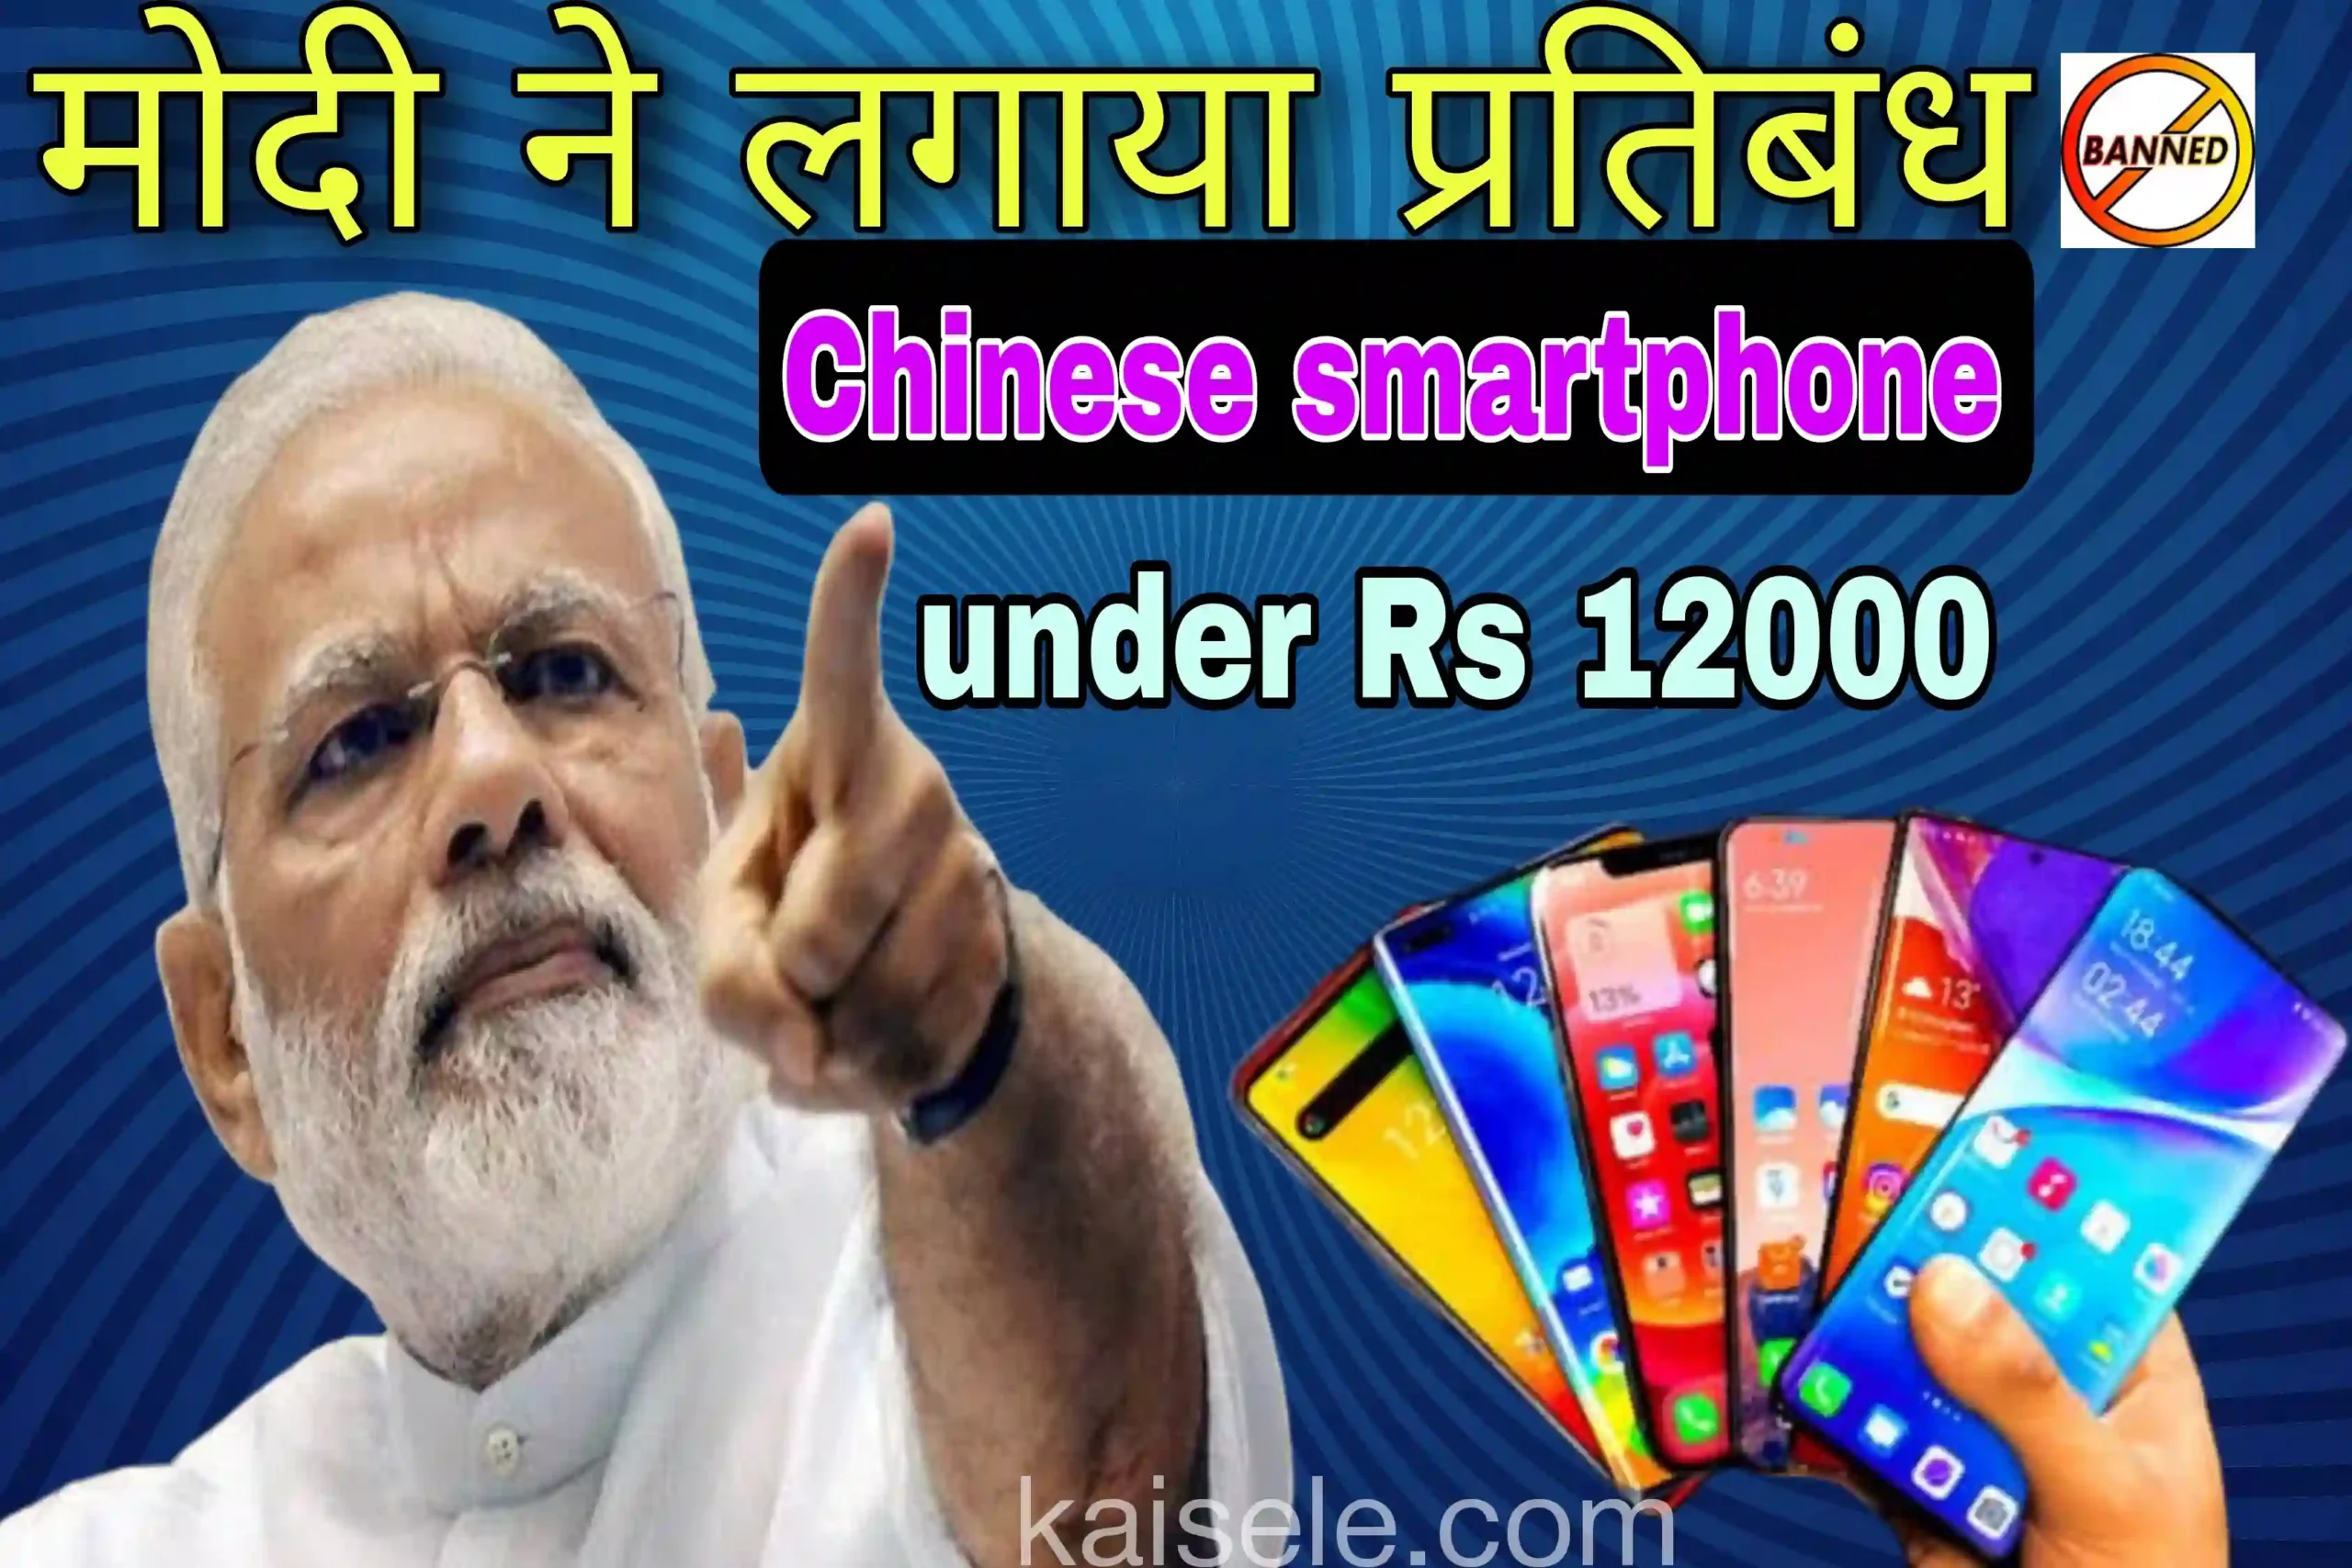 Chinese smartphone ban in india